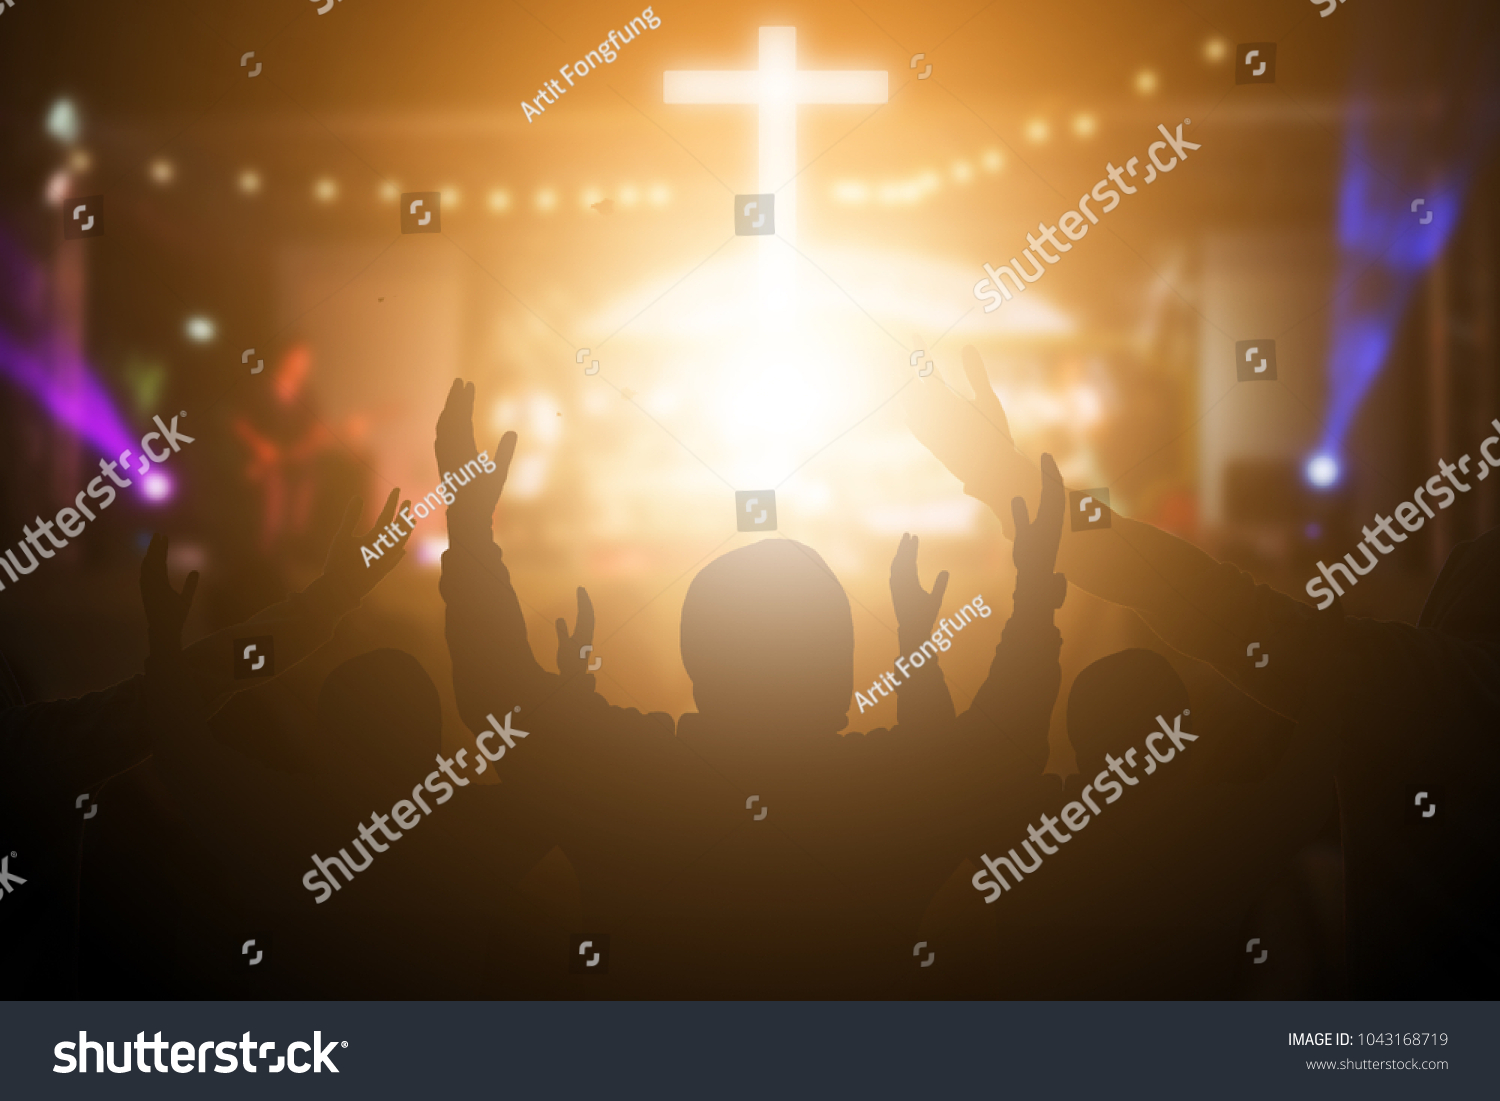 Christians raising their hands in praise and worship at a night music concert. Eucharist Therapy Bless God Helping Repent Catholic Easter Lent Mind Pray. Christian concept background. #1043168719